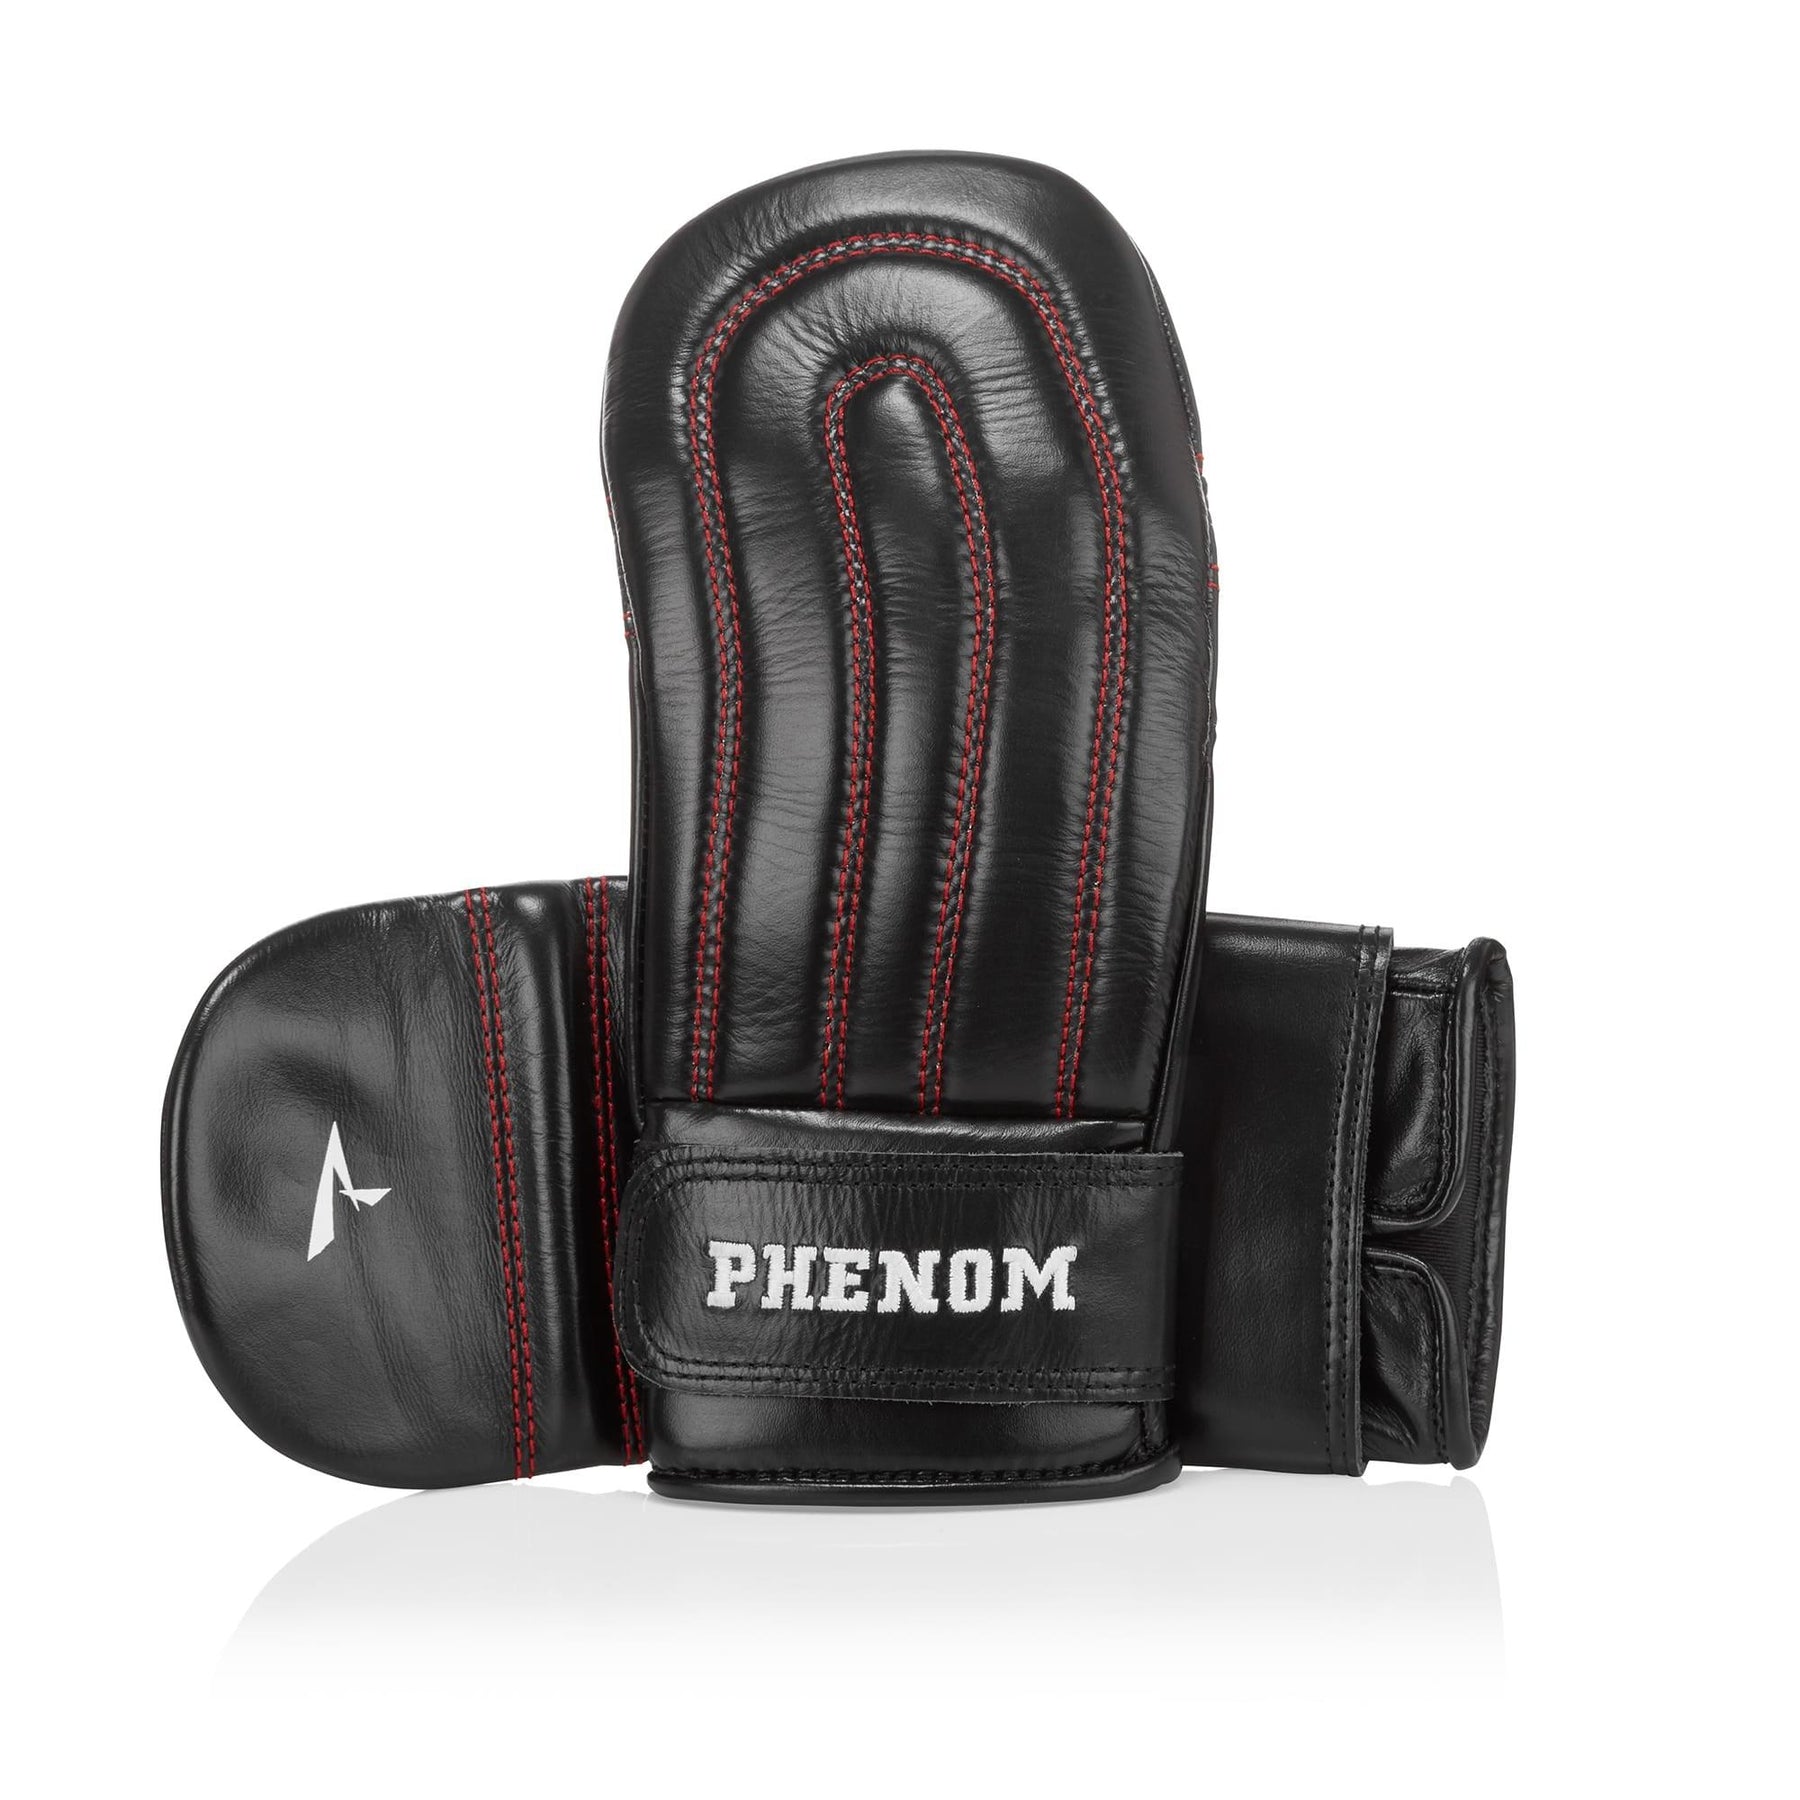 Buy UJEAVETTE® Kick Boxing Gloves Pu Leather Boxing Training Gloves  Punching Bag Mitts Red Kid Online at Low Prices in India - Amazon.in